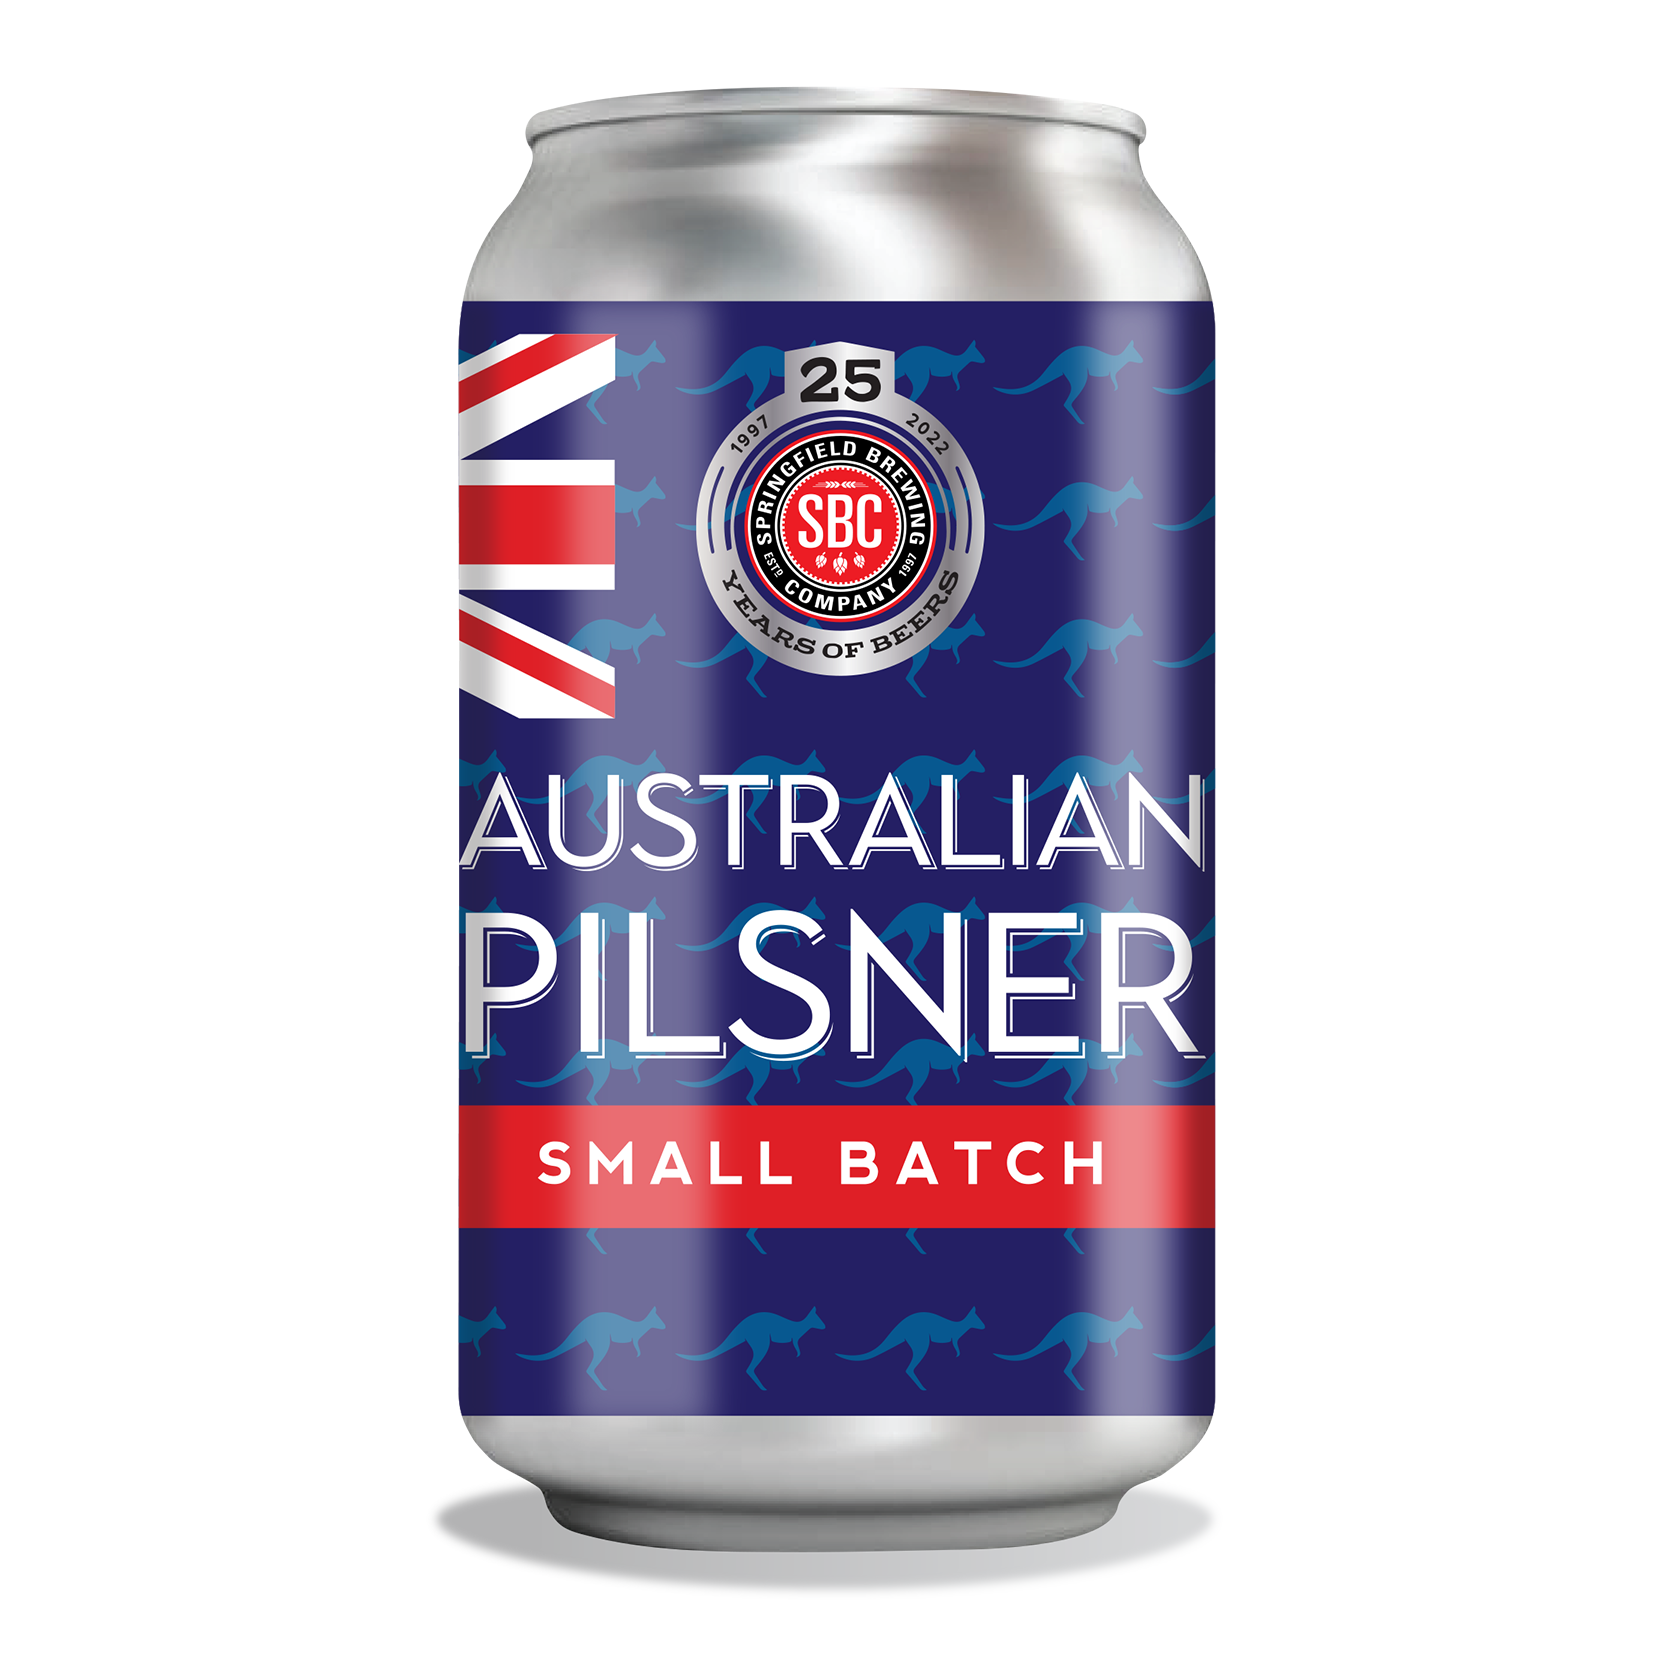 https://brewery.springfieldbrewingco.com/wp-content/uploads/2022/02/25thAustralianPils_CanWebsite.png